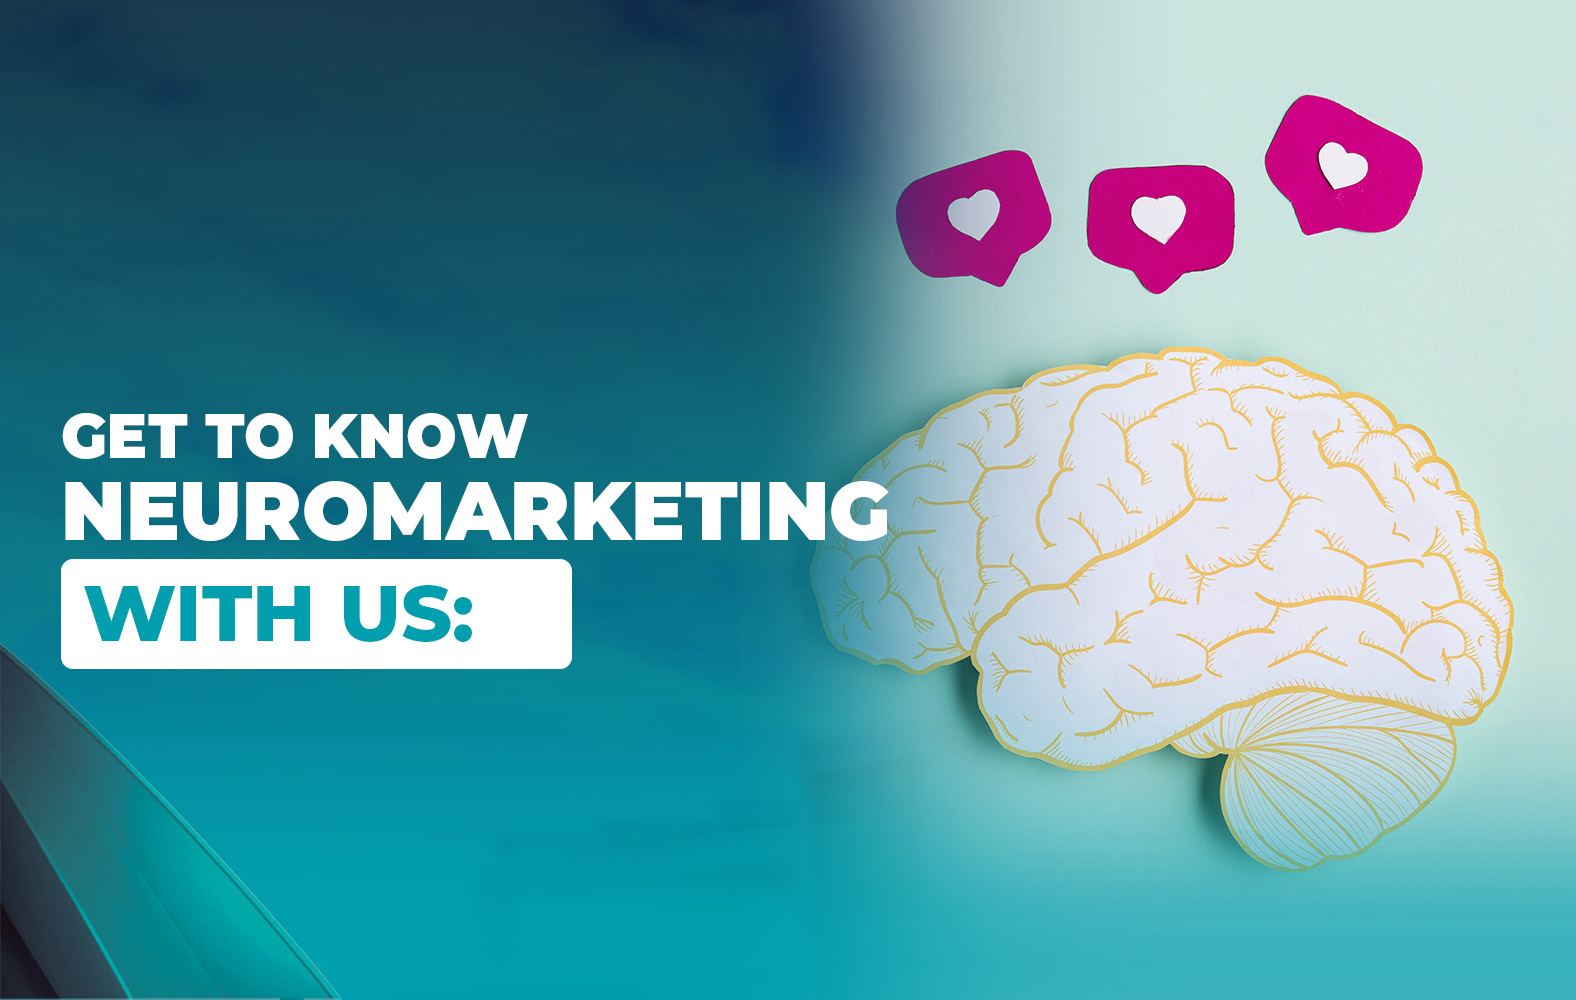 GET TO KNOW NEUROMARKETING WITH US: